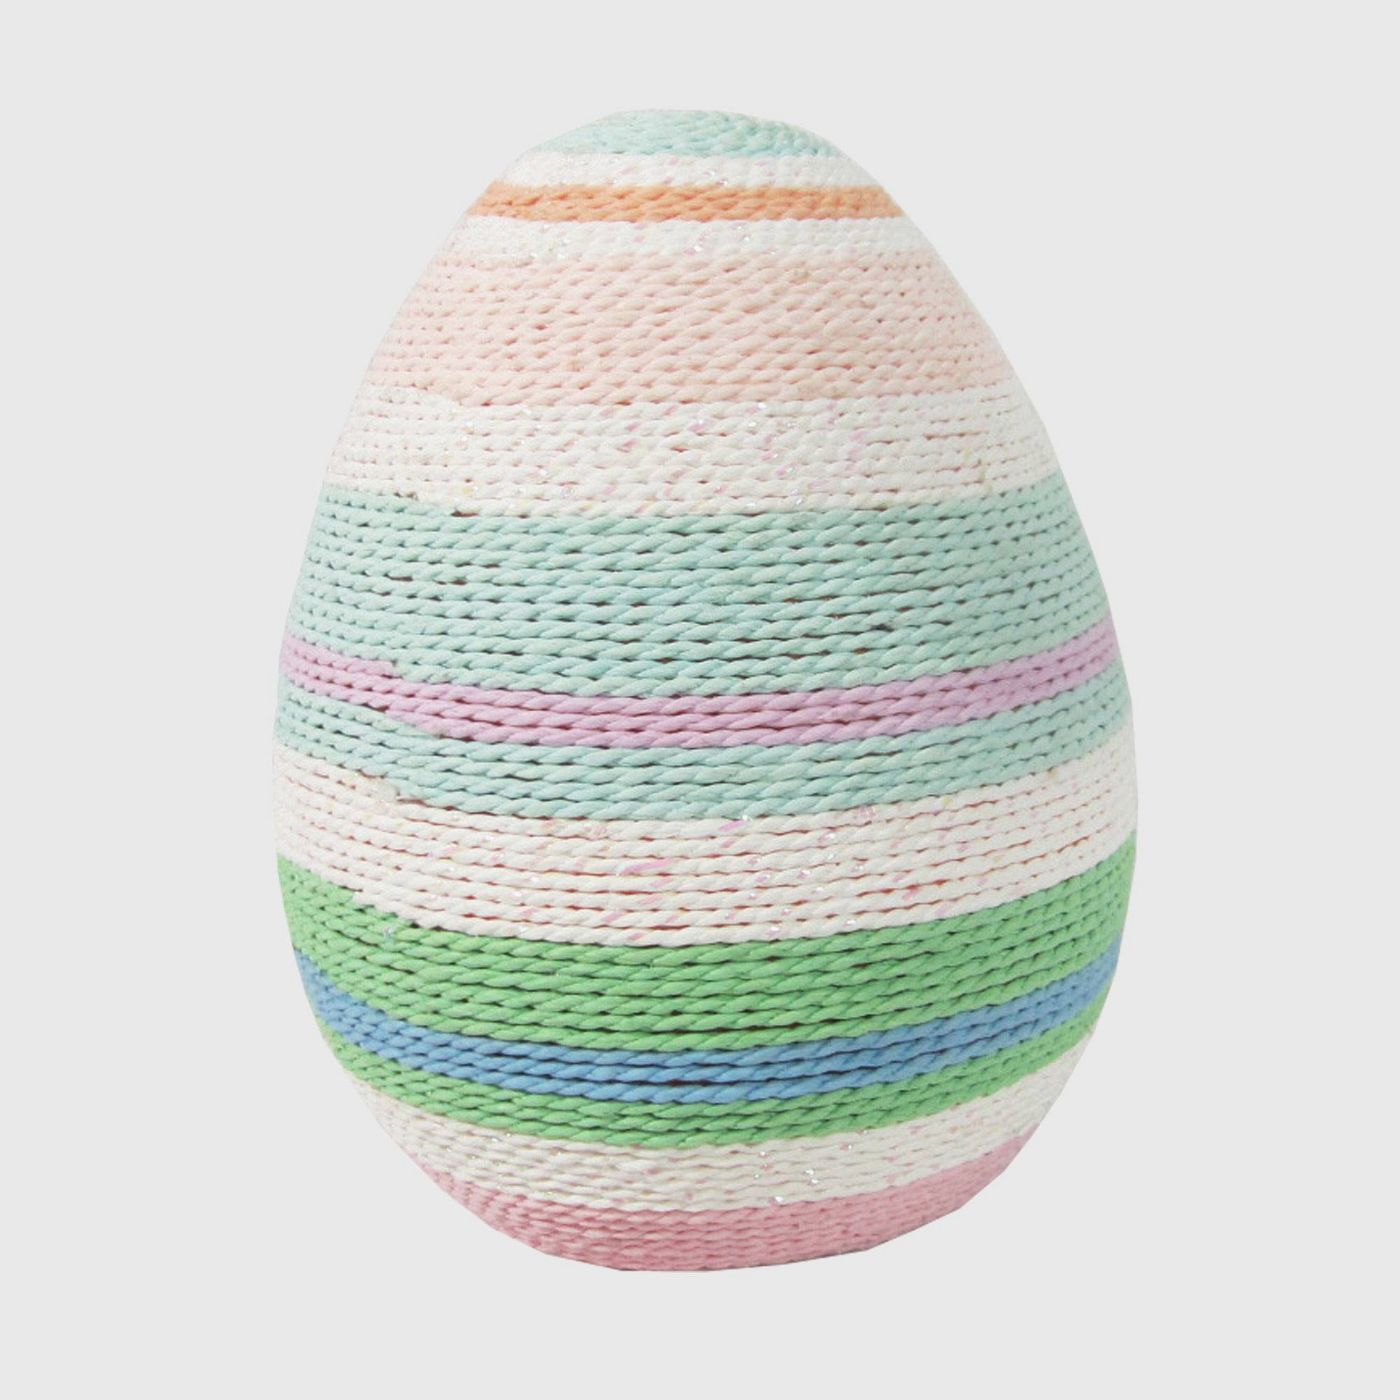 Yarn-wrapped-Easter-egg-from-Spritz-44048